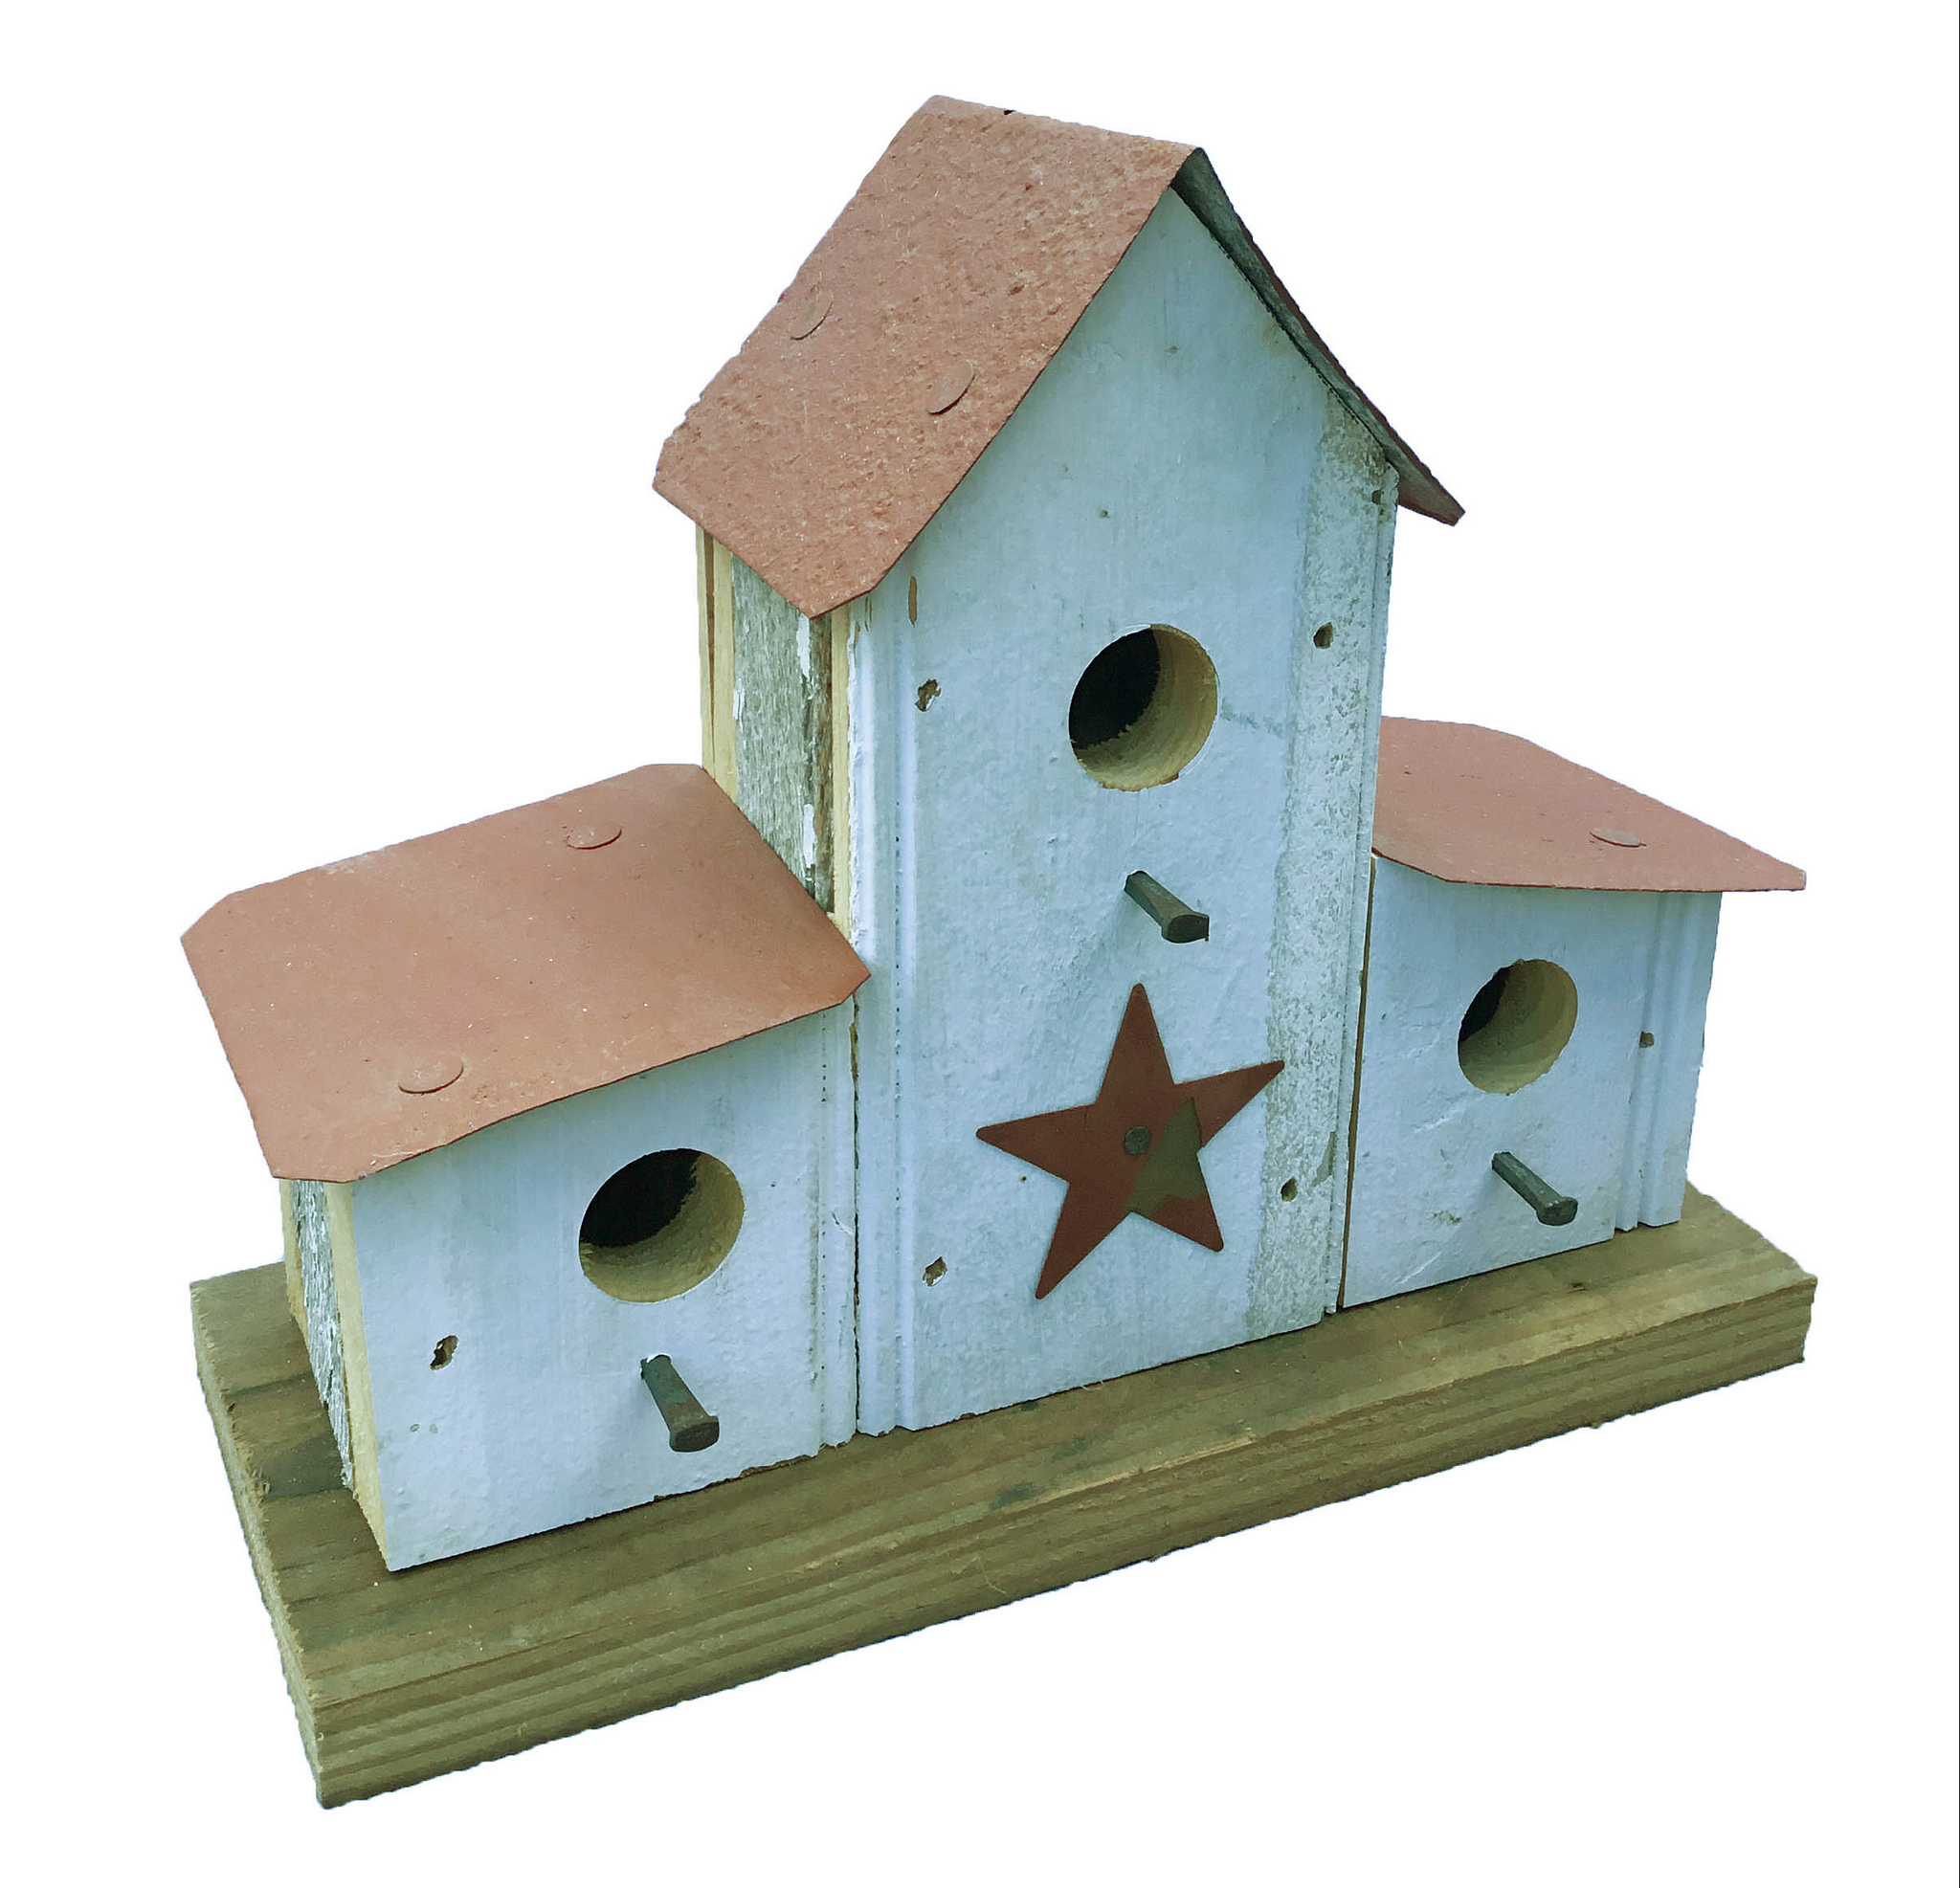 Barn Wood Small Double Lean-To Bird House - image 1 of 2